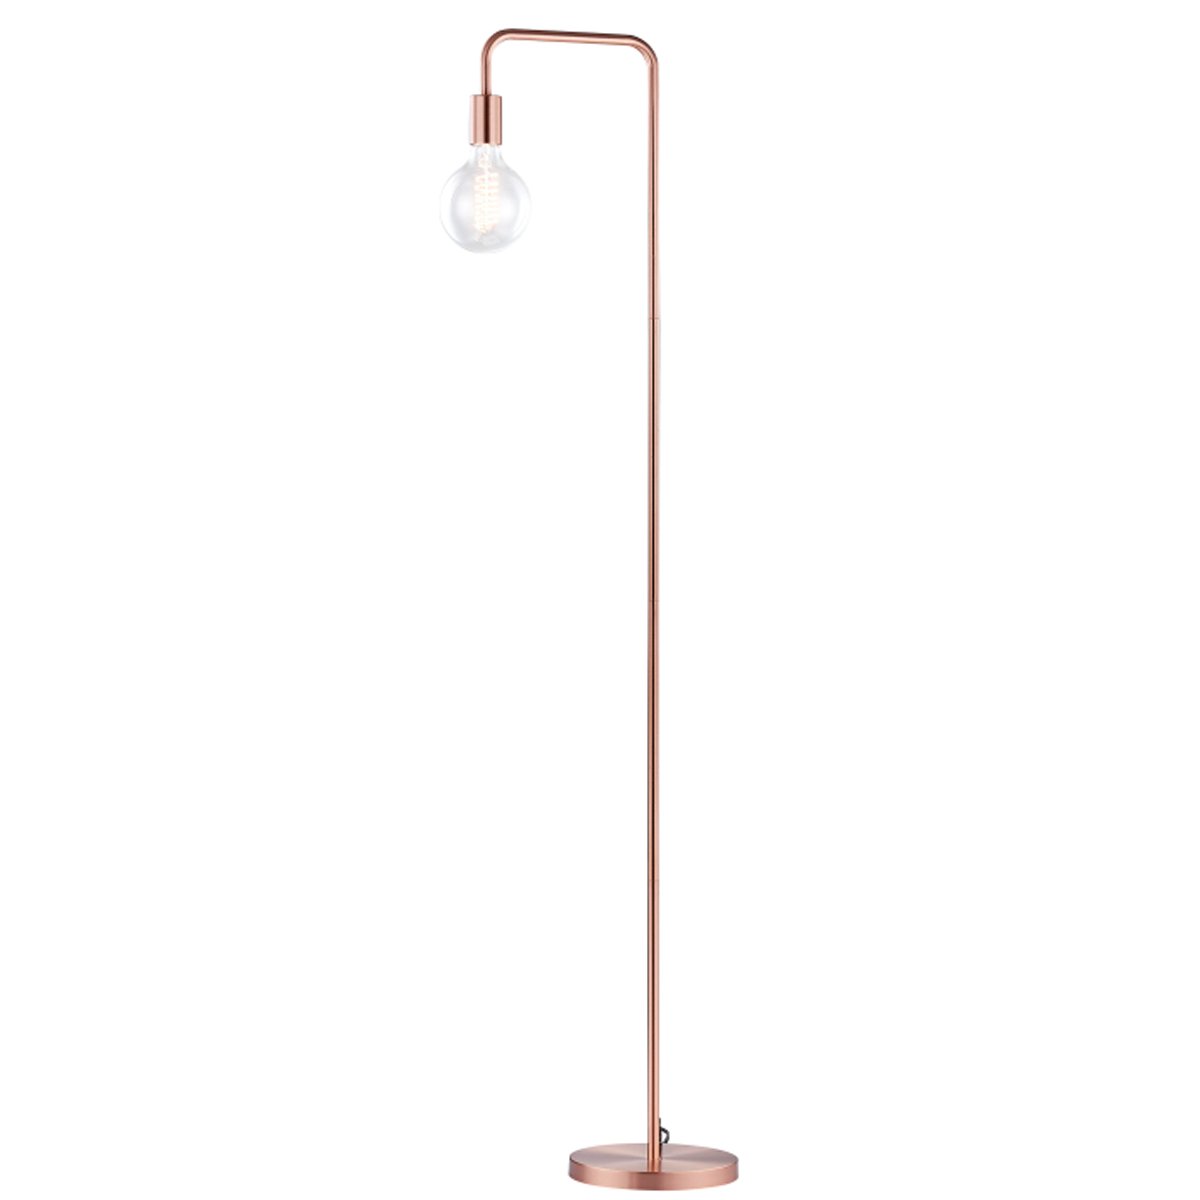 Our Caitlin floor lamp features an angular metal frame to bring a hint of industrial style to your interior. Add a filament bulb for an extra special effect. Finished in brushed copper.